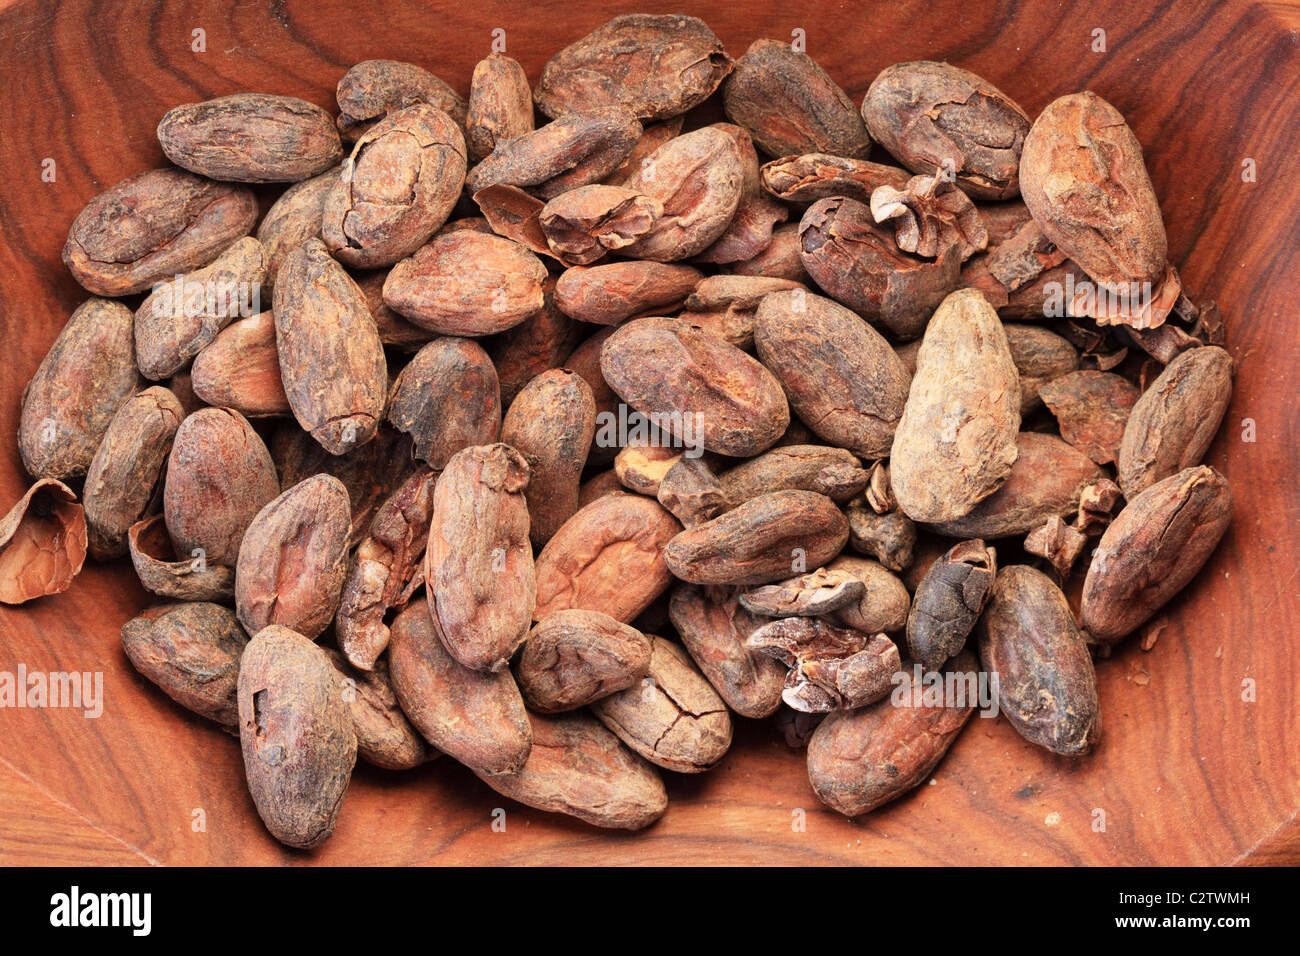 cocoa or cacao beans in a wooden bowl Stock Photo